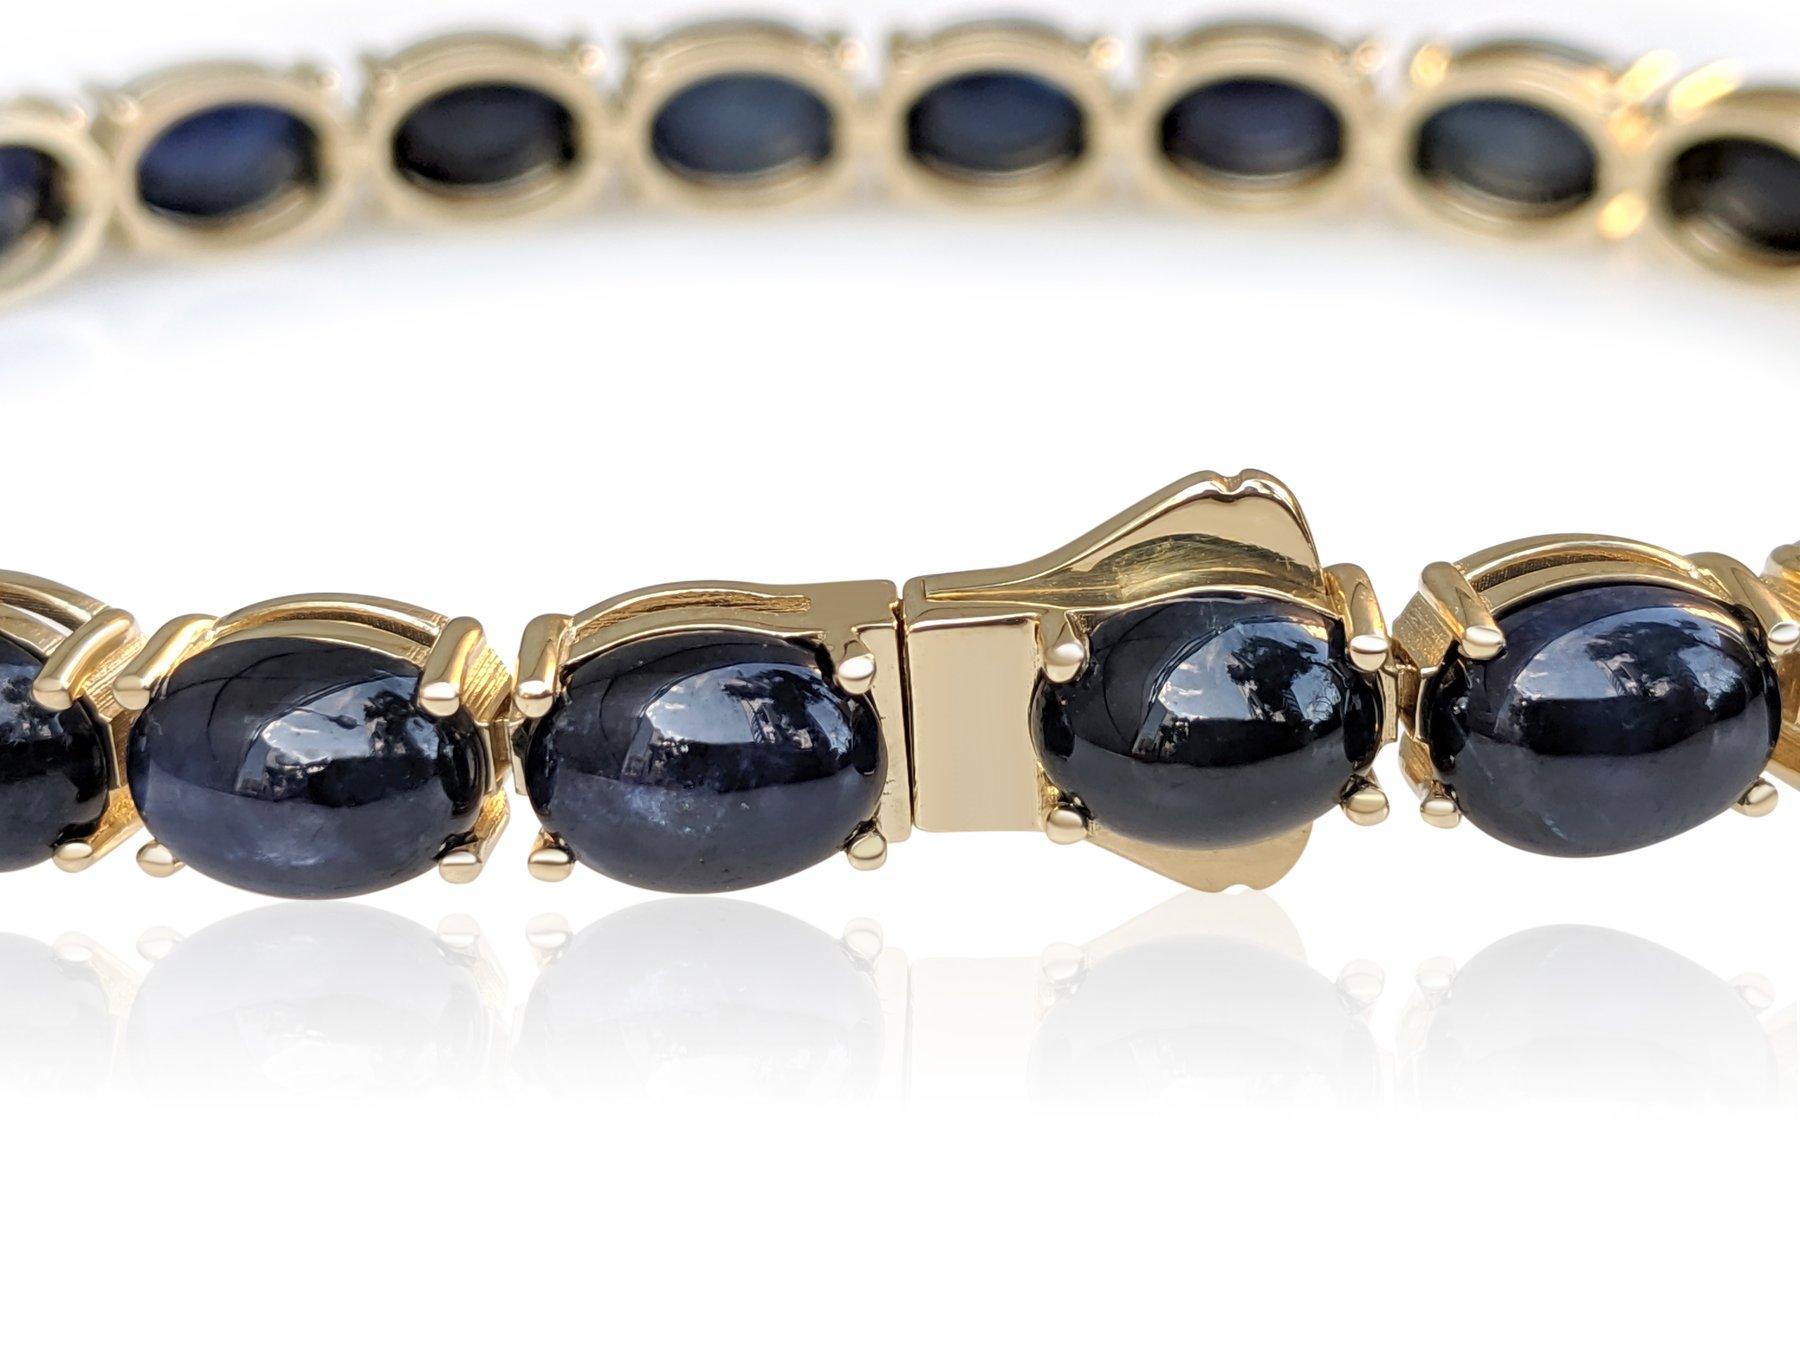 The bracelet will stand out in any occasion and is a wonderful gift for yourself or your loved one.

Size: 18 cm

Center Natural Sapphires:
Weight: 42.74 carat, 22 stones
Color: Blue
Shape: Oval Cabochon Cut

Item ships from Israeli Diamonds